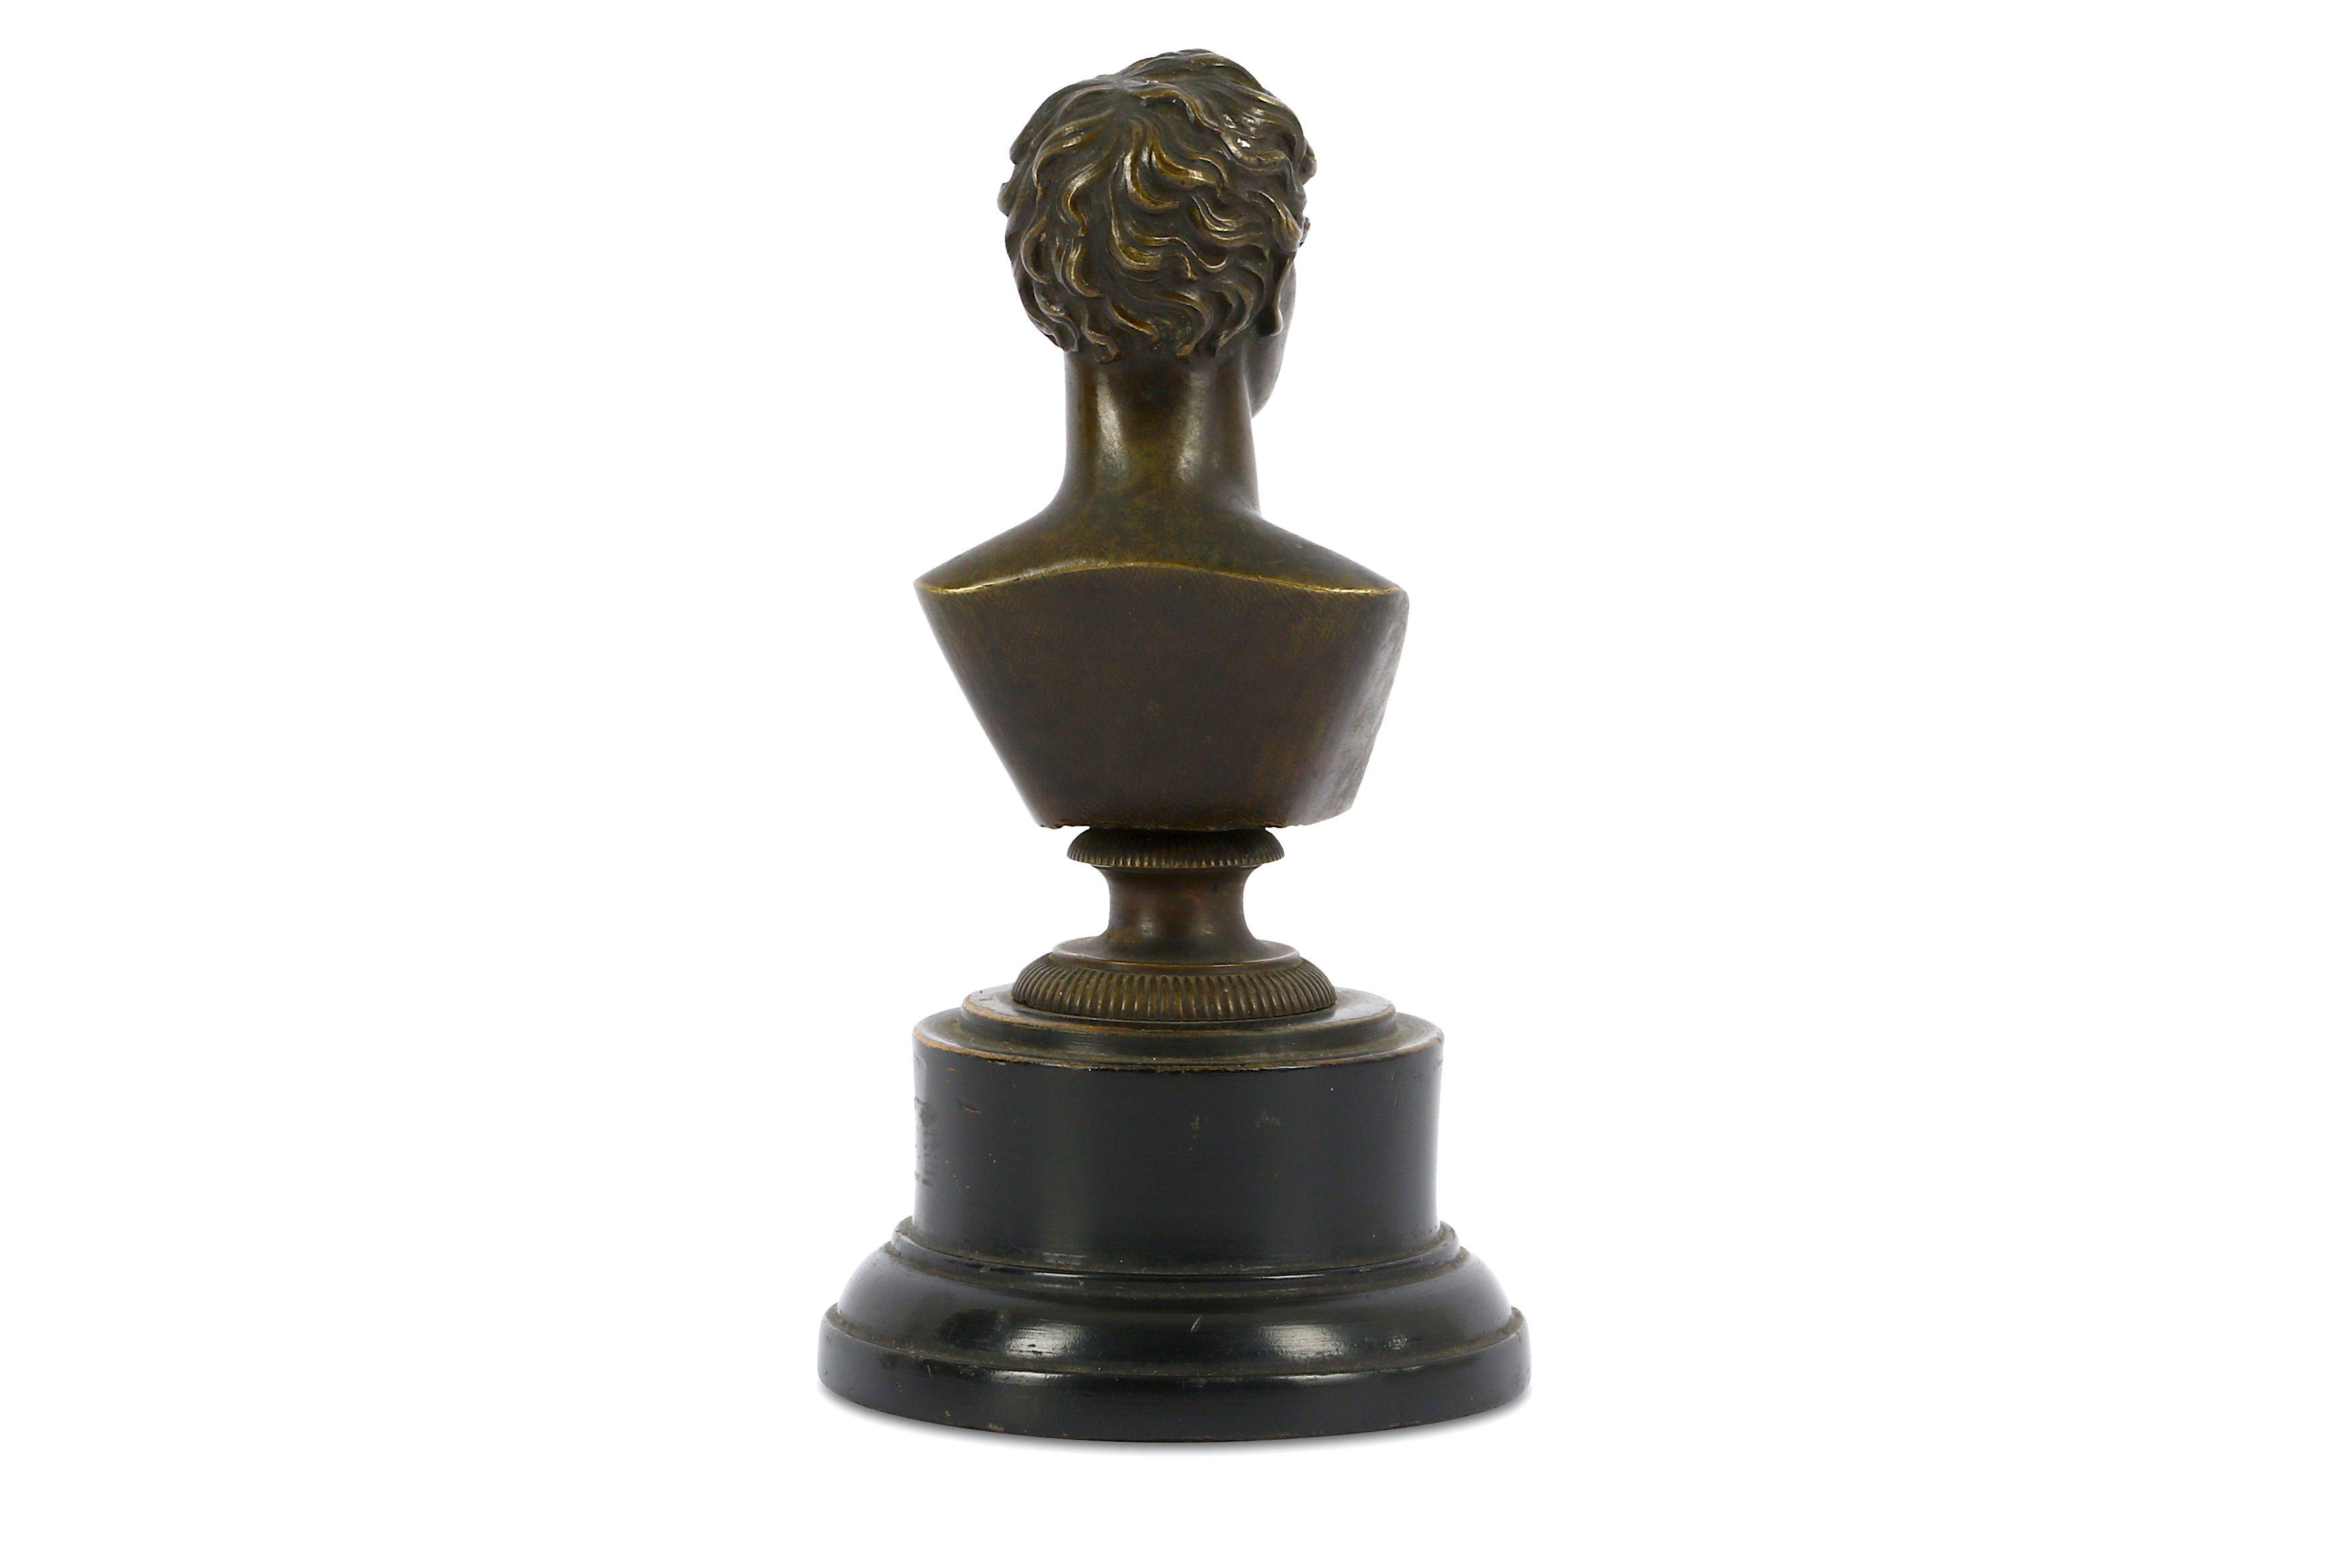 Lot 18 - AN EARLY VICTORIAN BRONZE BUST OF LORD BYRON